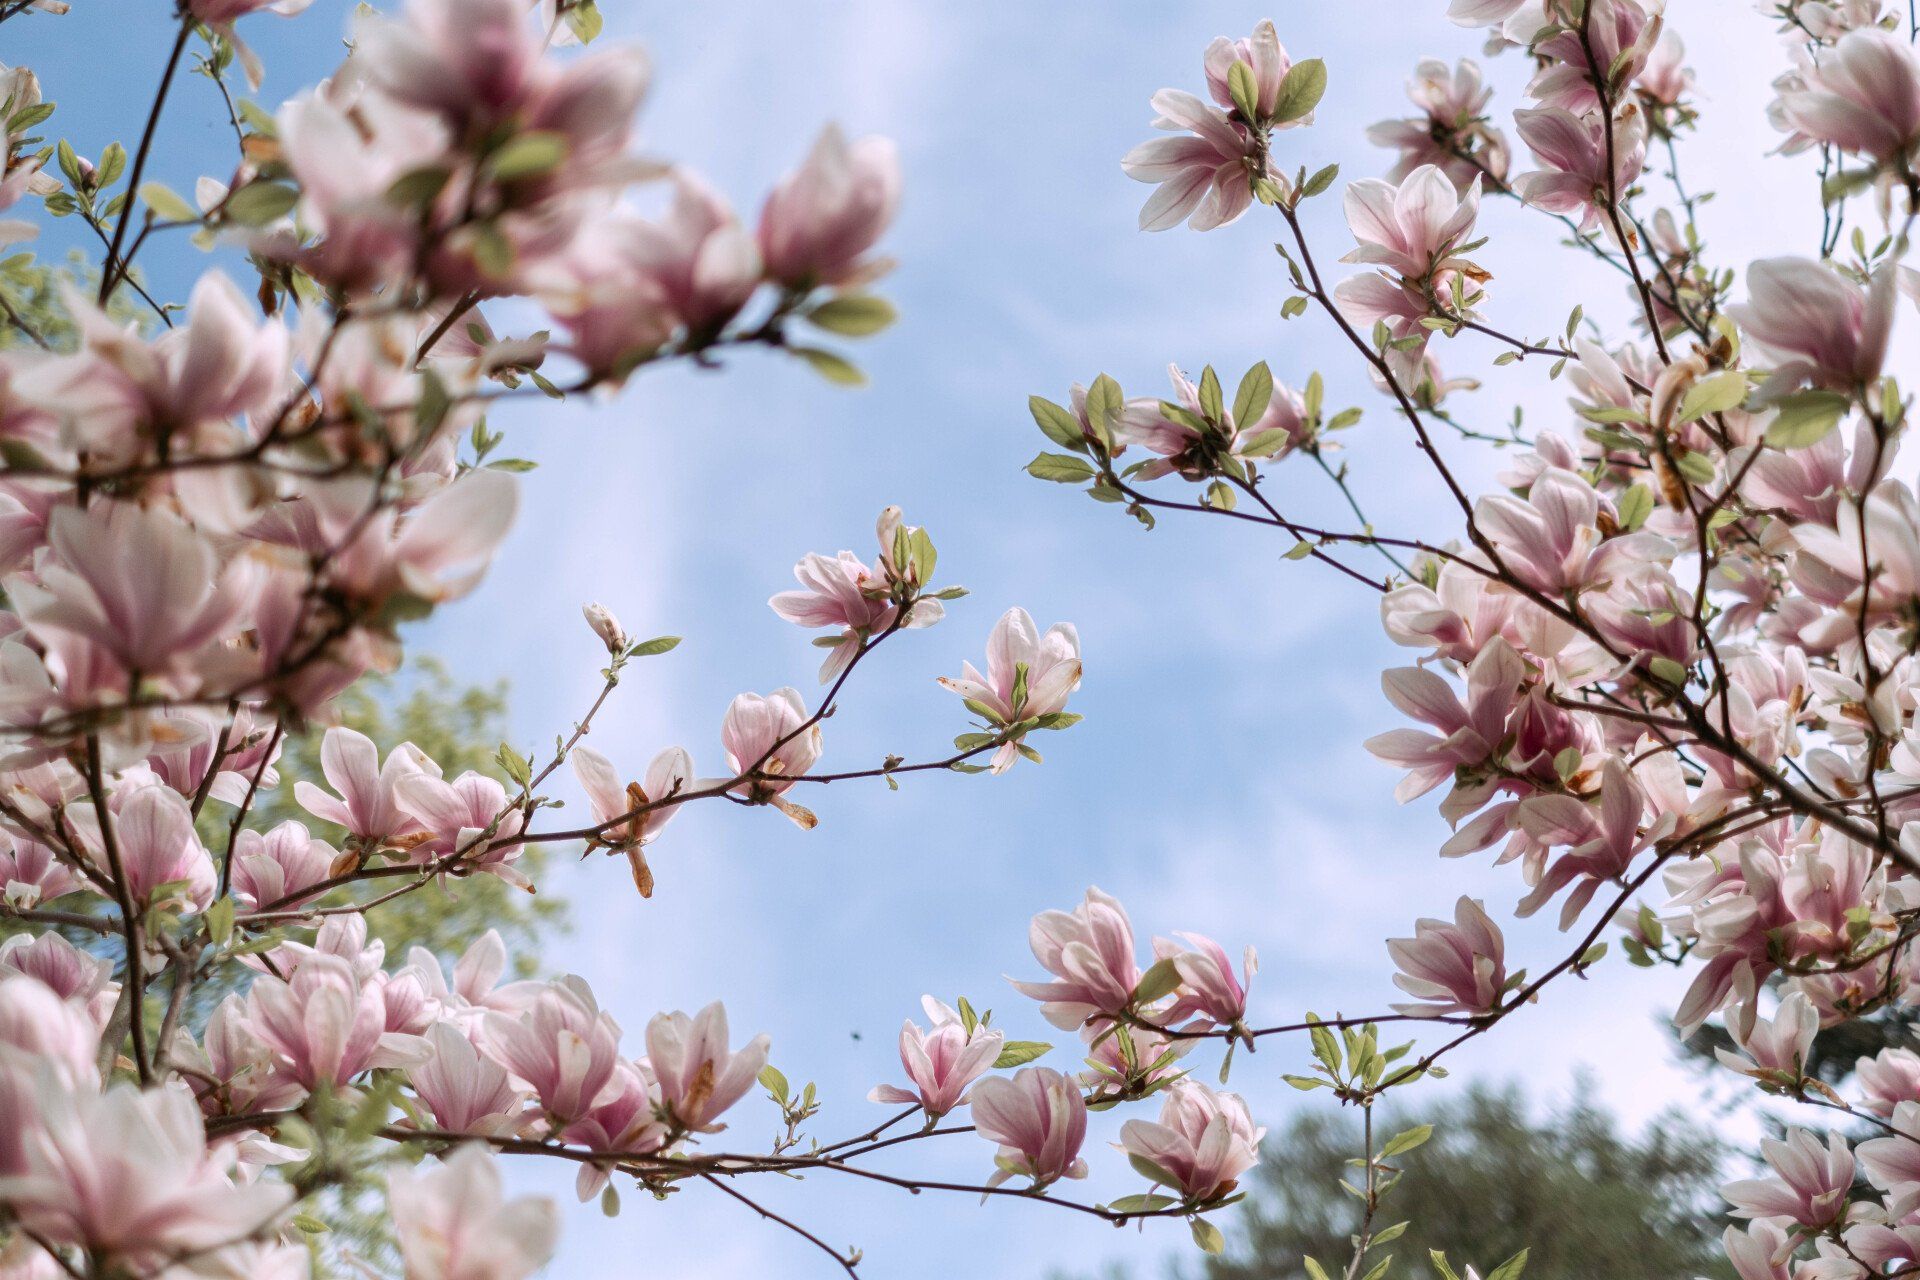 A tree with pink flowers and green leaves against a blue sky.